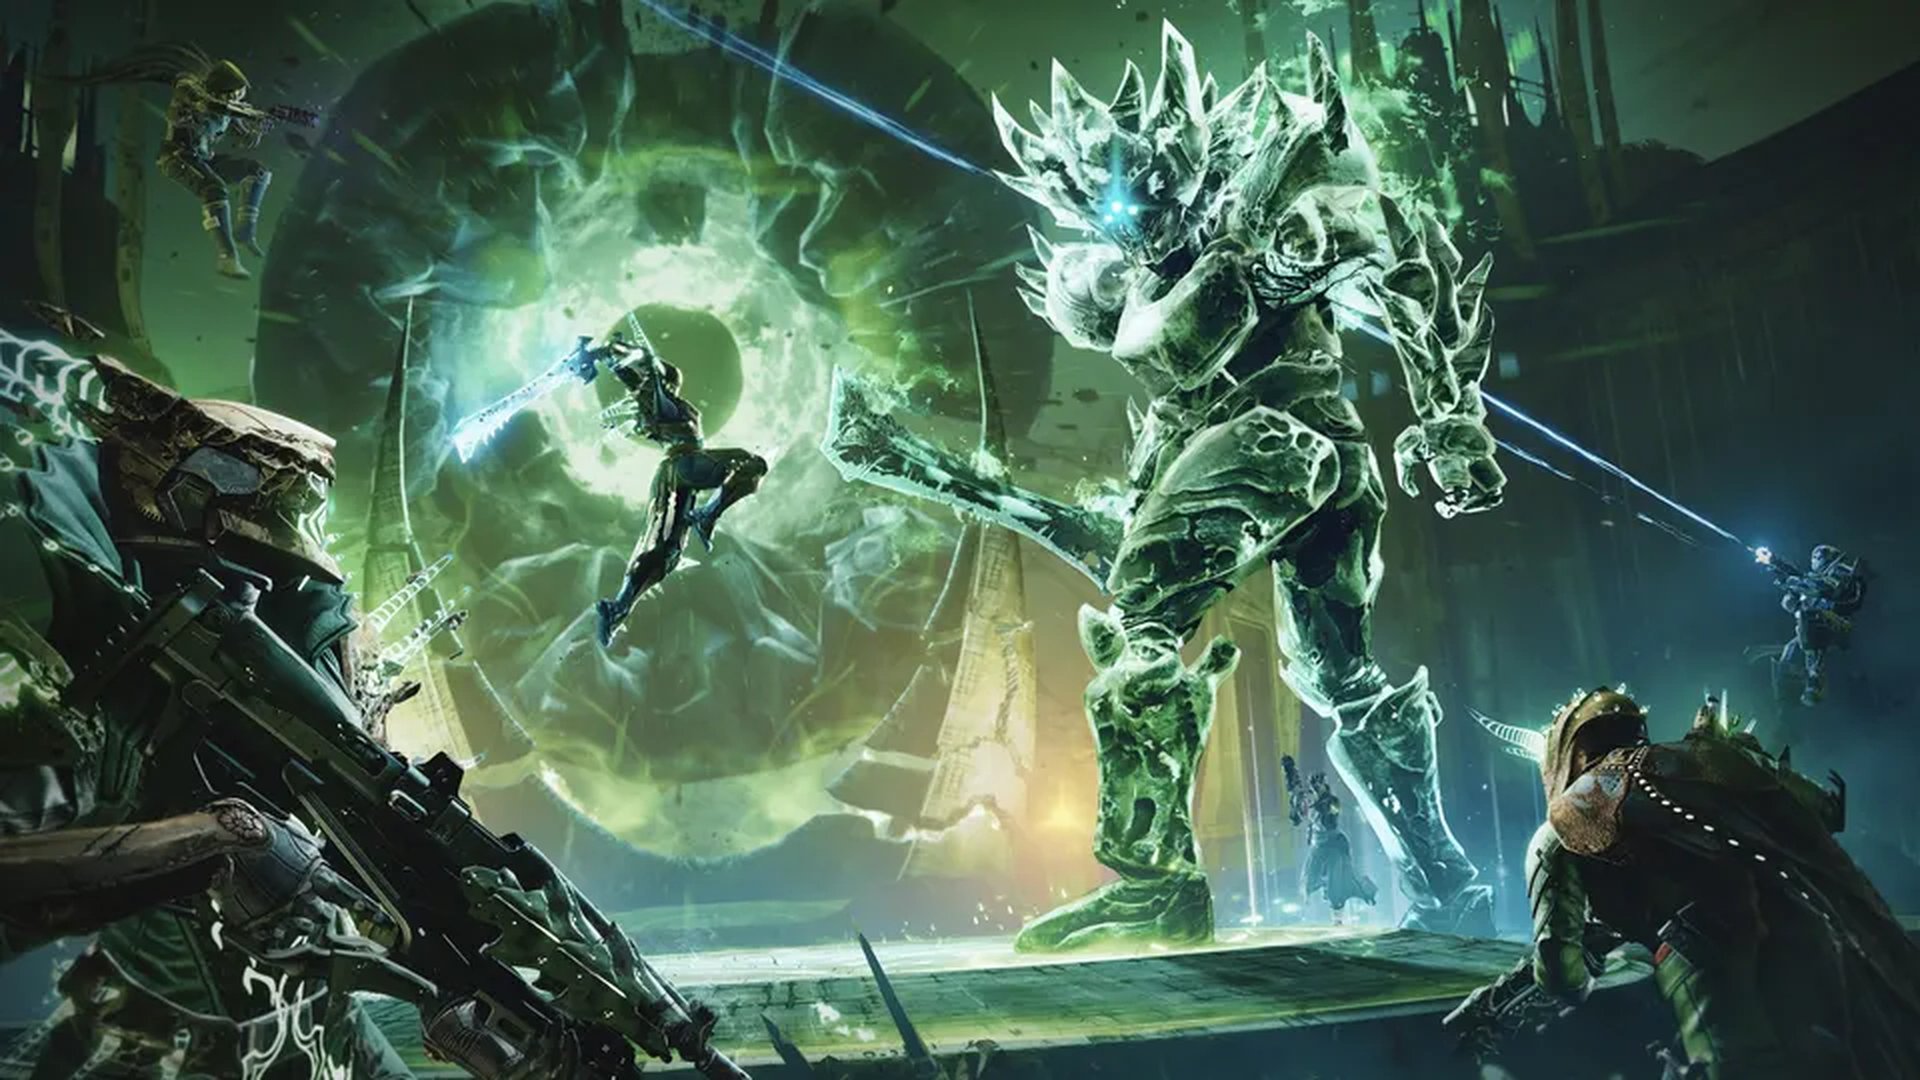 Guardians battling Crota in the final showdown of Destiny 2's Crota's End raid, showcasing teamwork and strategy amidst the dark, Hive-infested chambers.